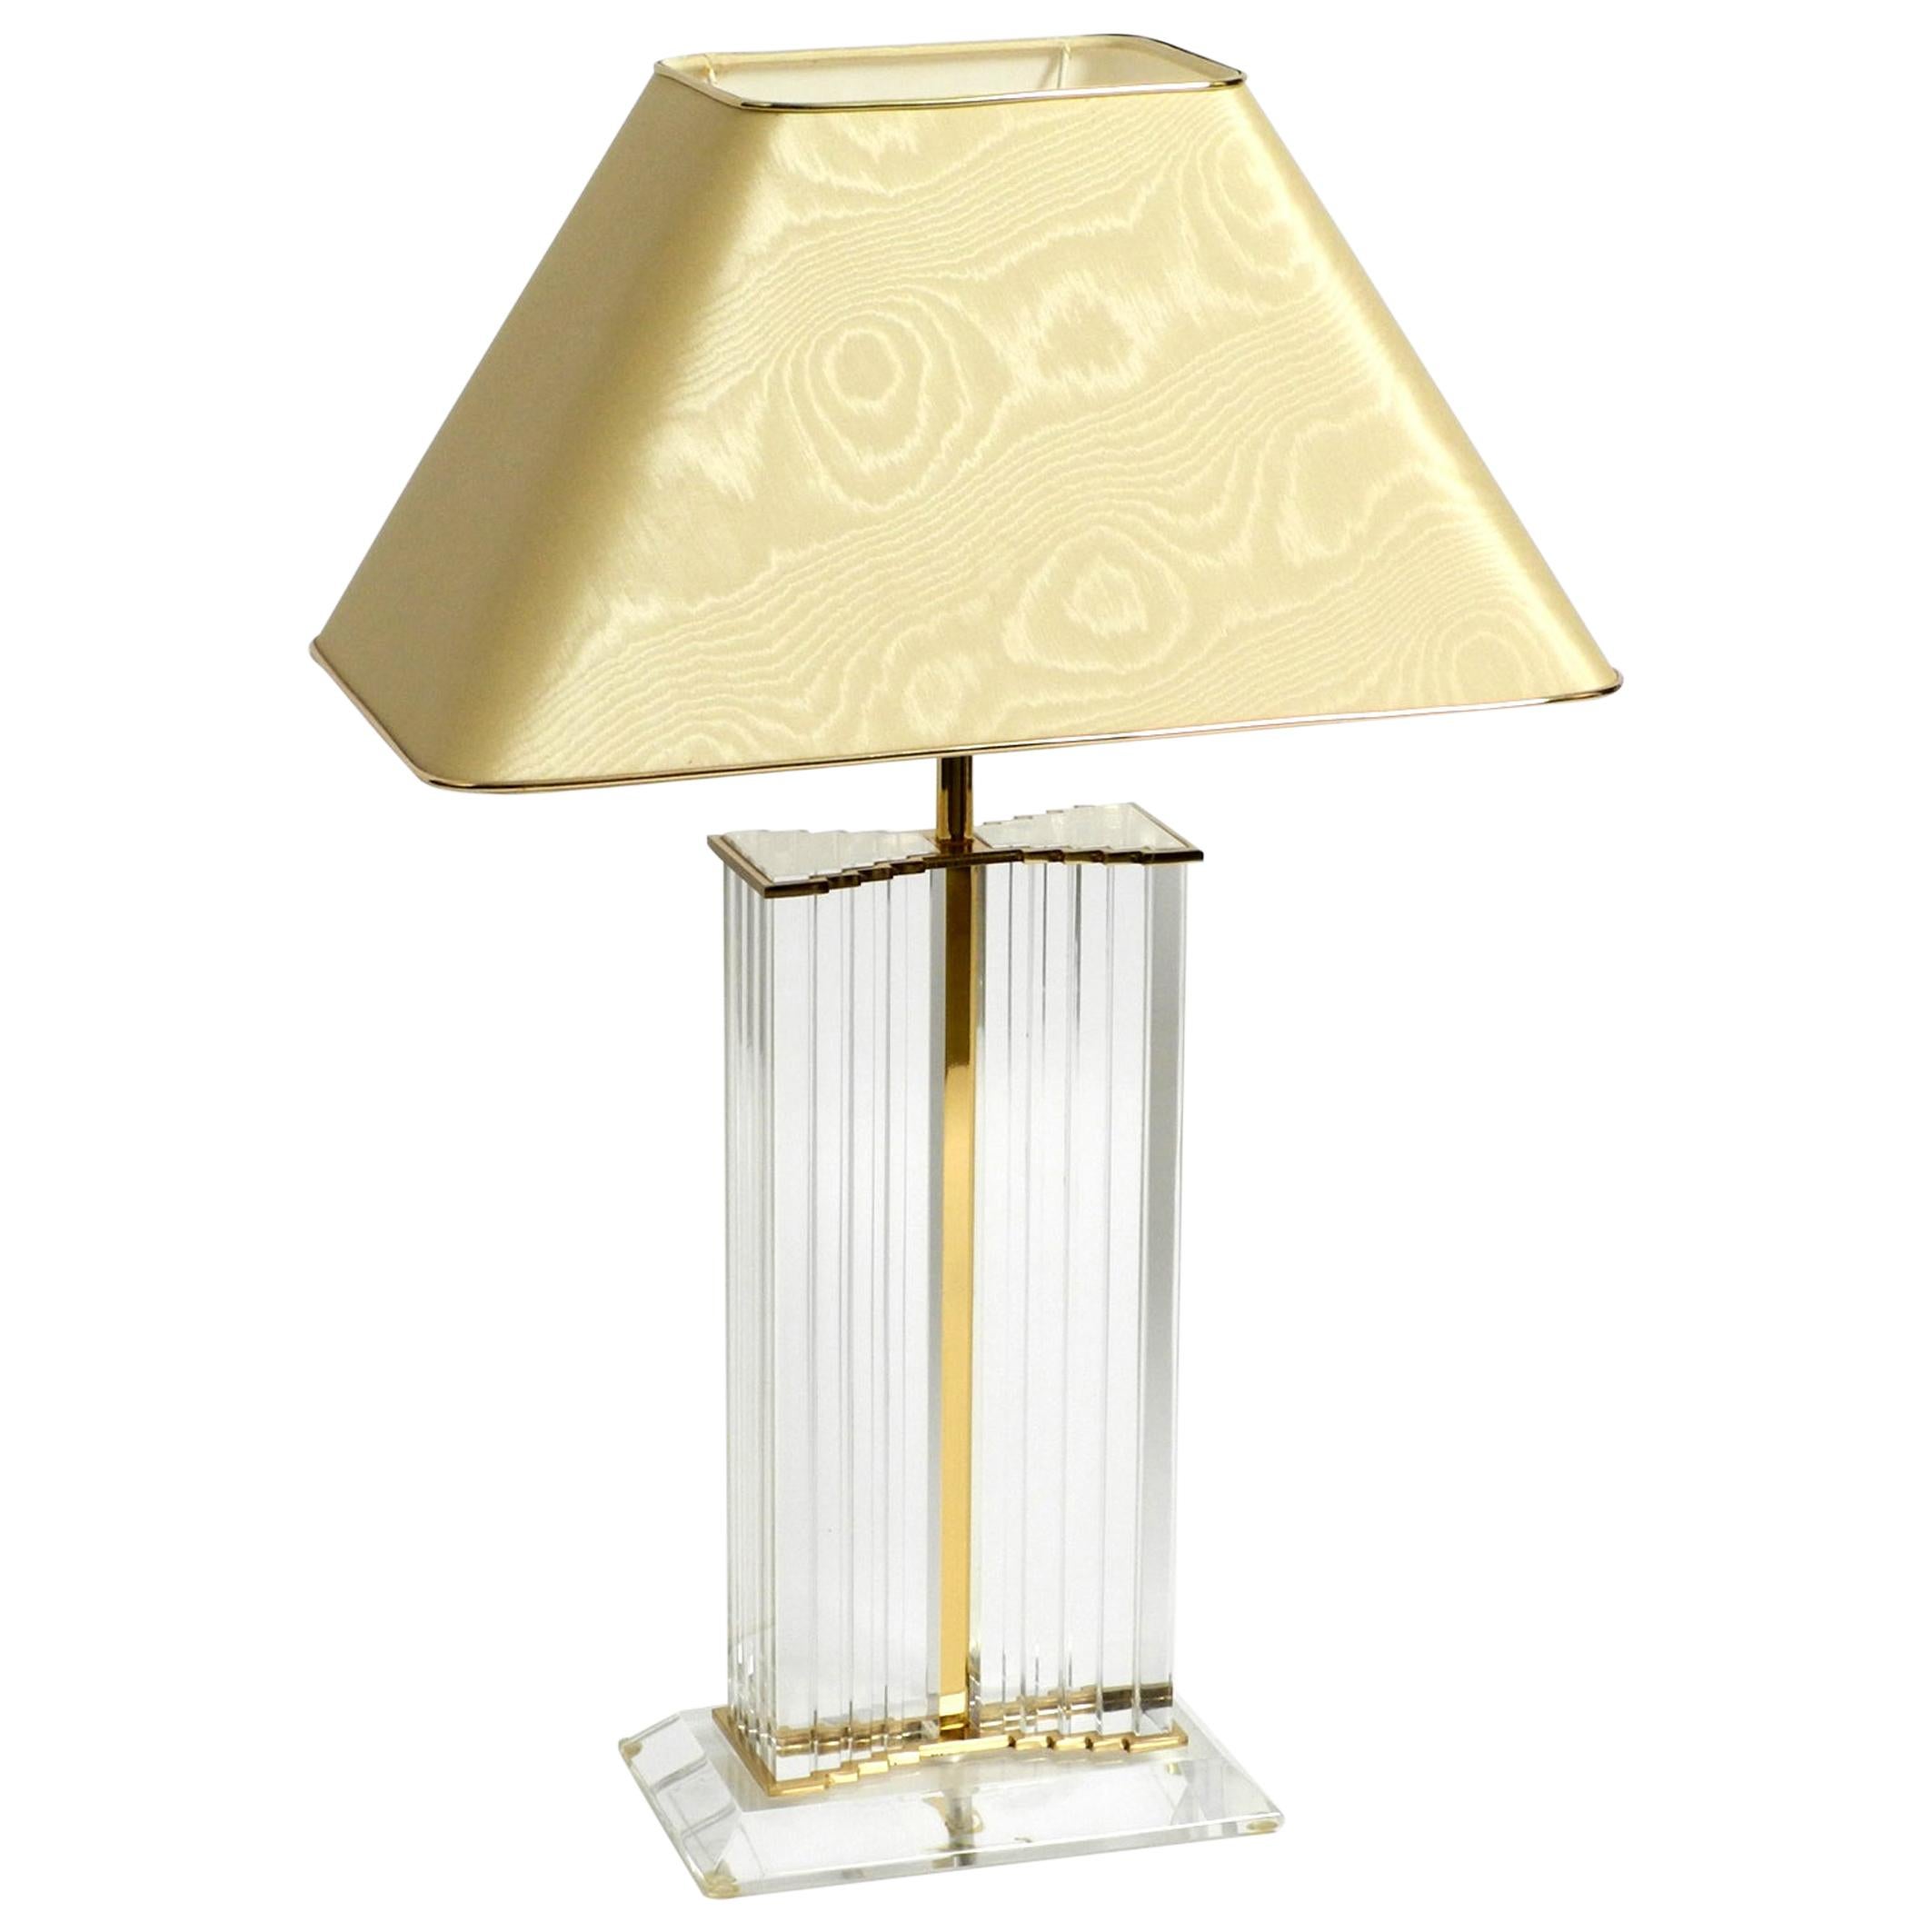 Very Rare Elegant Large Plexiglass Table Lamp from the 1970s with Silk Shade For Sale